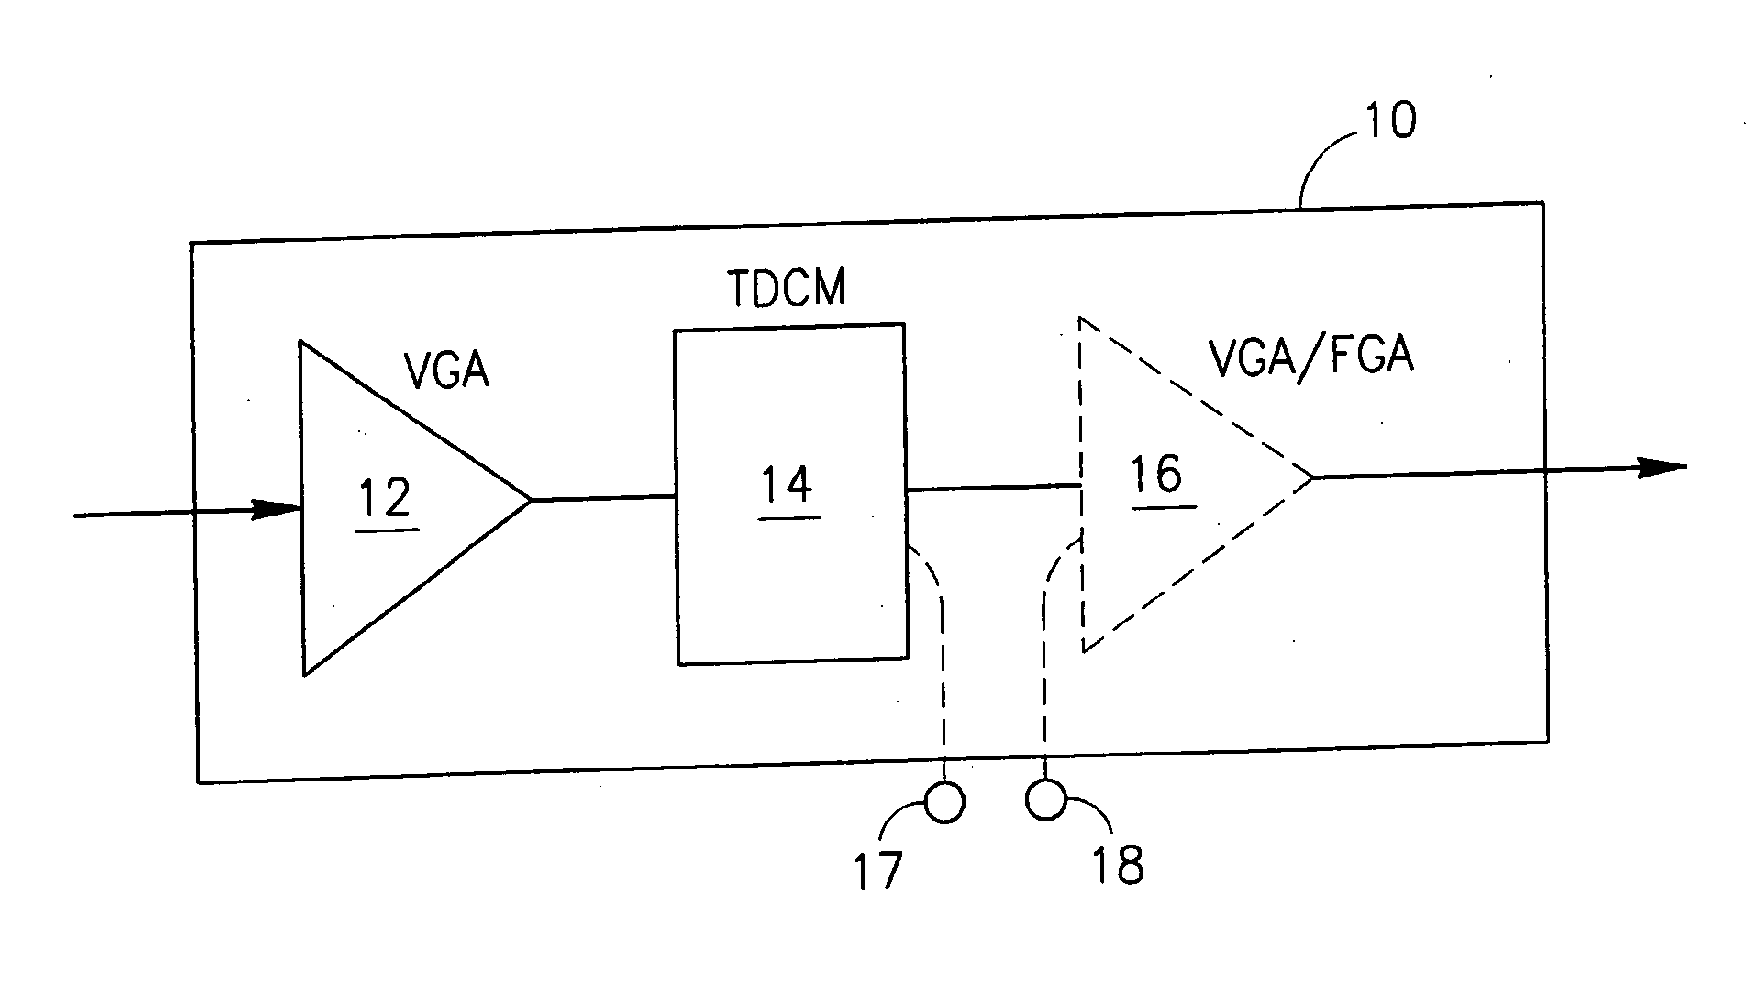 Technique for compensating undesired effects in optical links of an optical communication network